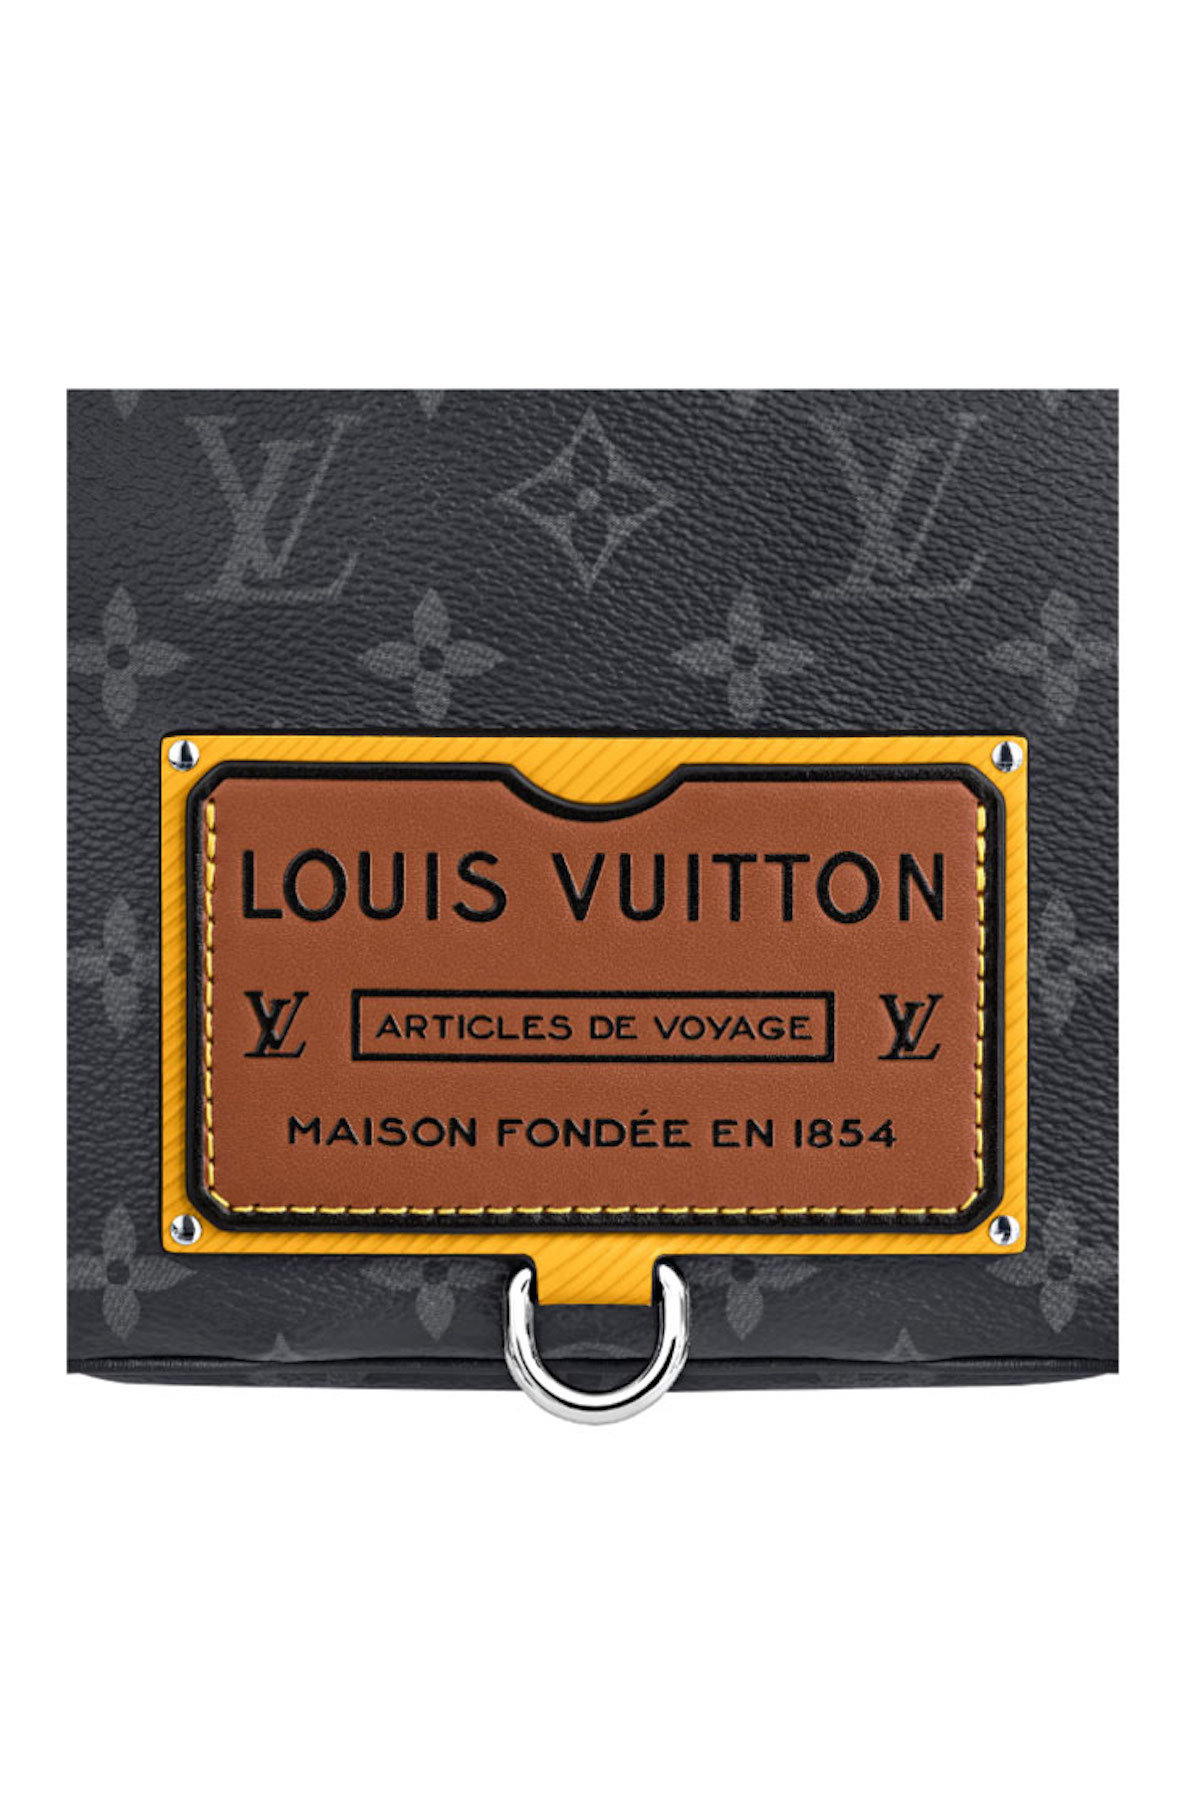 Louis Vuitton Gaston Labels Collection (9th year anniversary gift